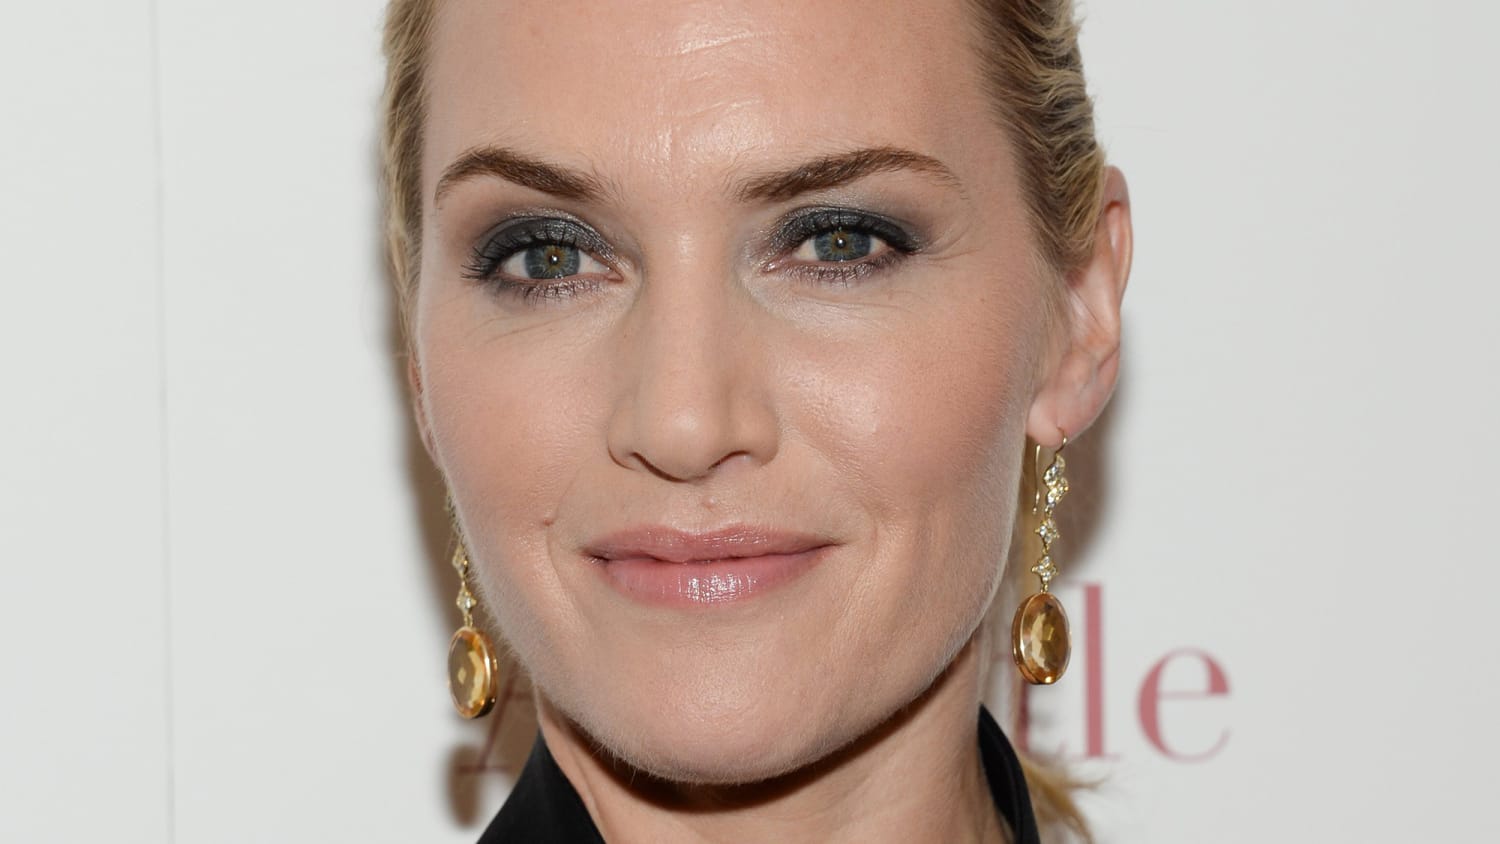 Kate Winslet's body-positive message to daughter: 'We're lucky we're curvy'